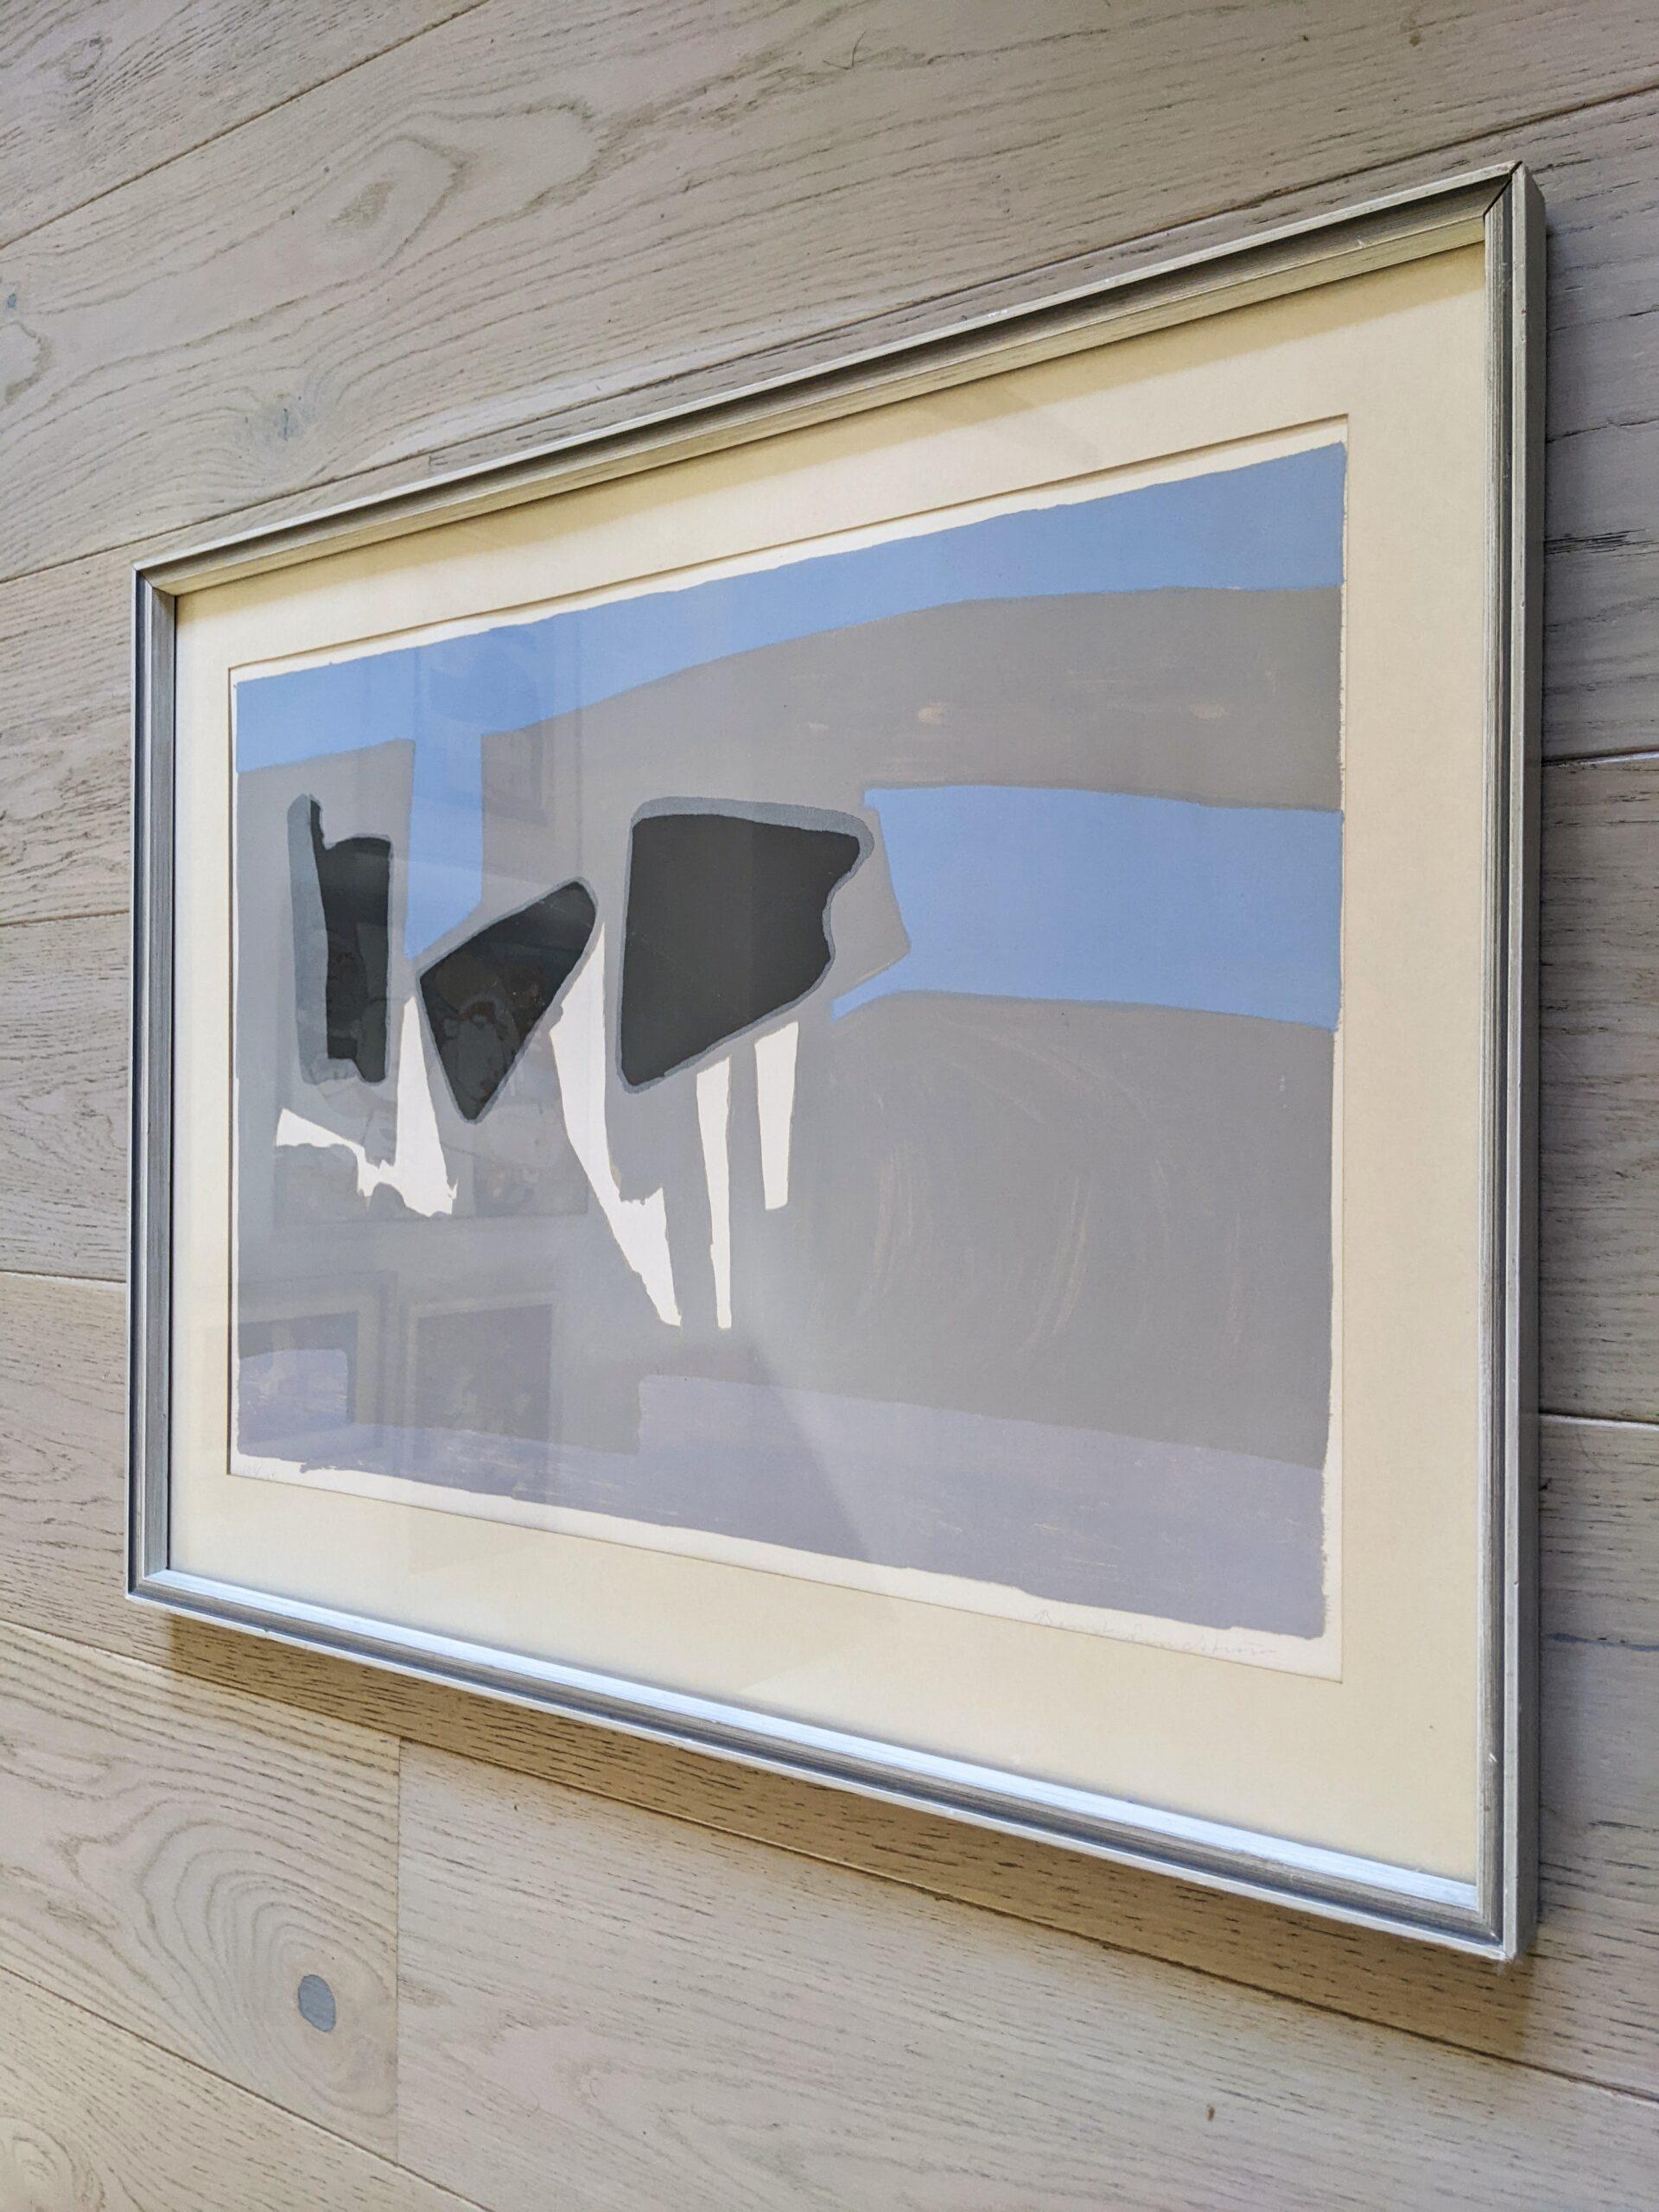 FORM
Size: 55 x 71 cm (including the frame)
Lithograph on paper

A mid century abstract limited edition (108/360) coloured lithograph, signed by Bengt Lindström.

This mid century print is housed behind glass in a very complementary grey wood frame.